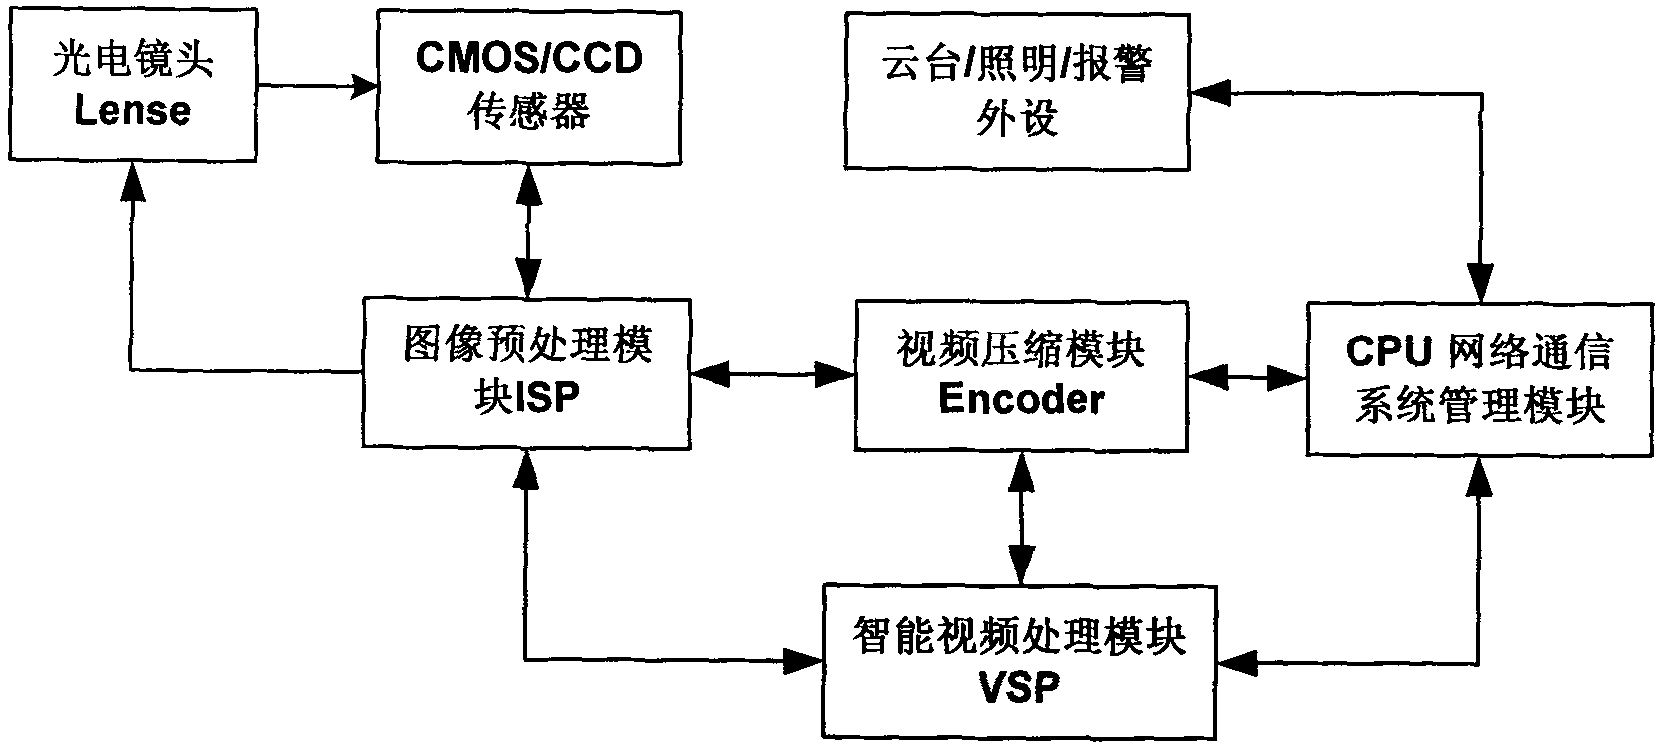 Double-mode intelligent vision sensing system architecture